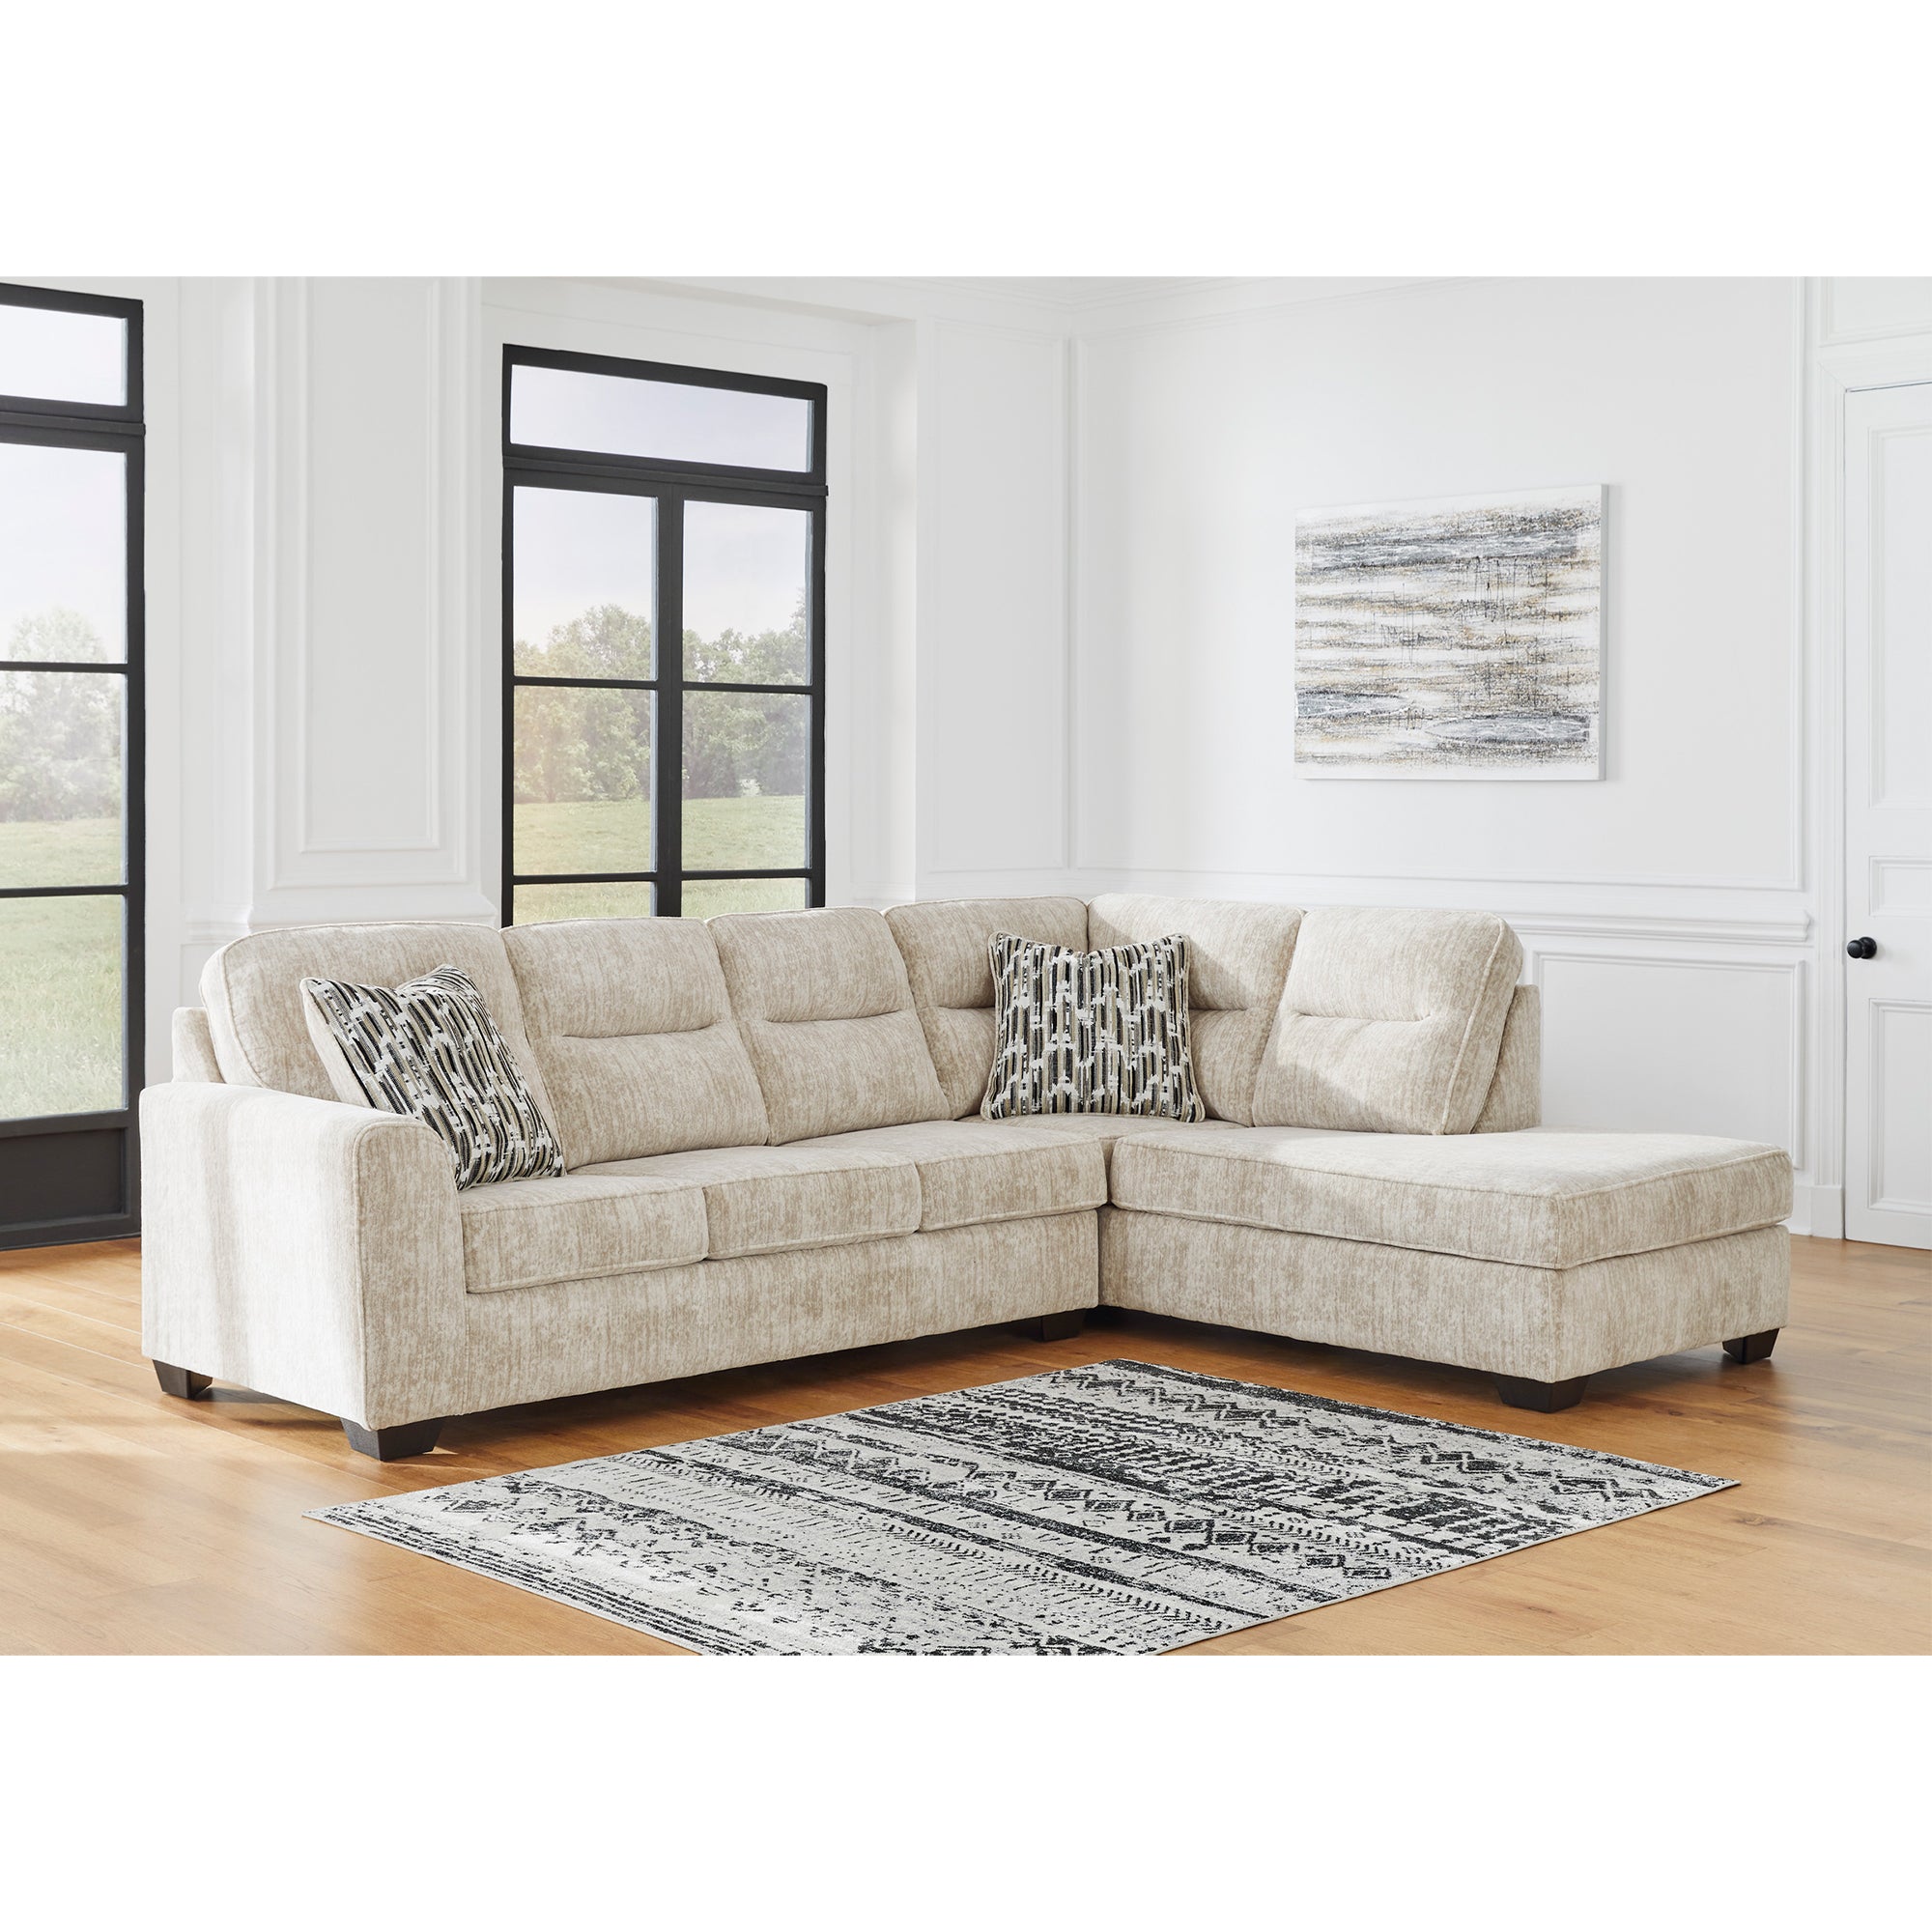 Lonoke 2-Piece Sectional with Chaise in Parchment Color